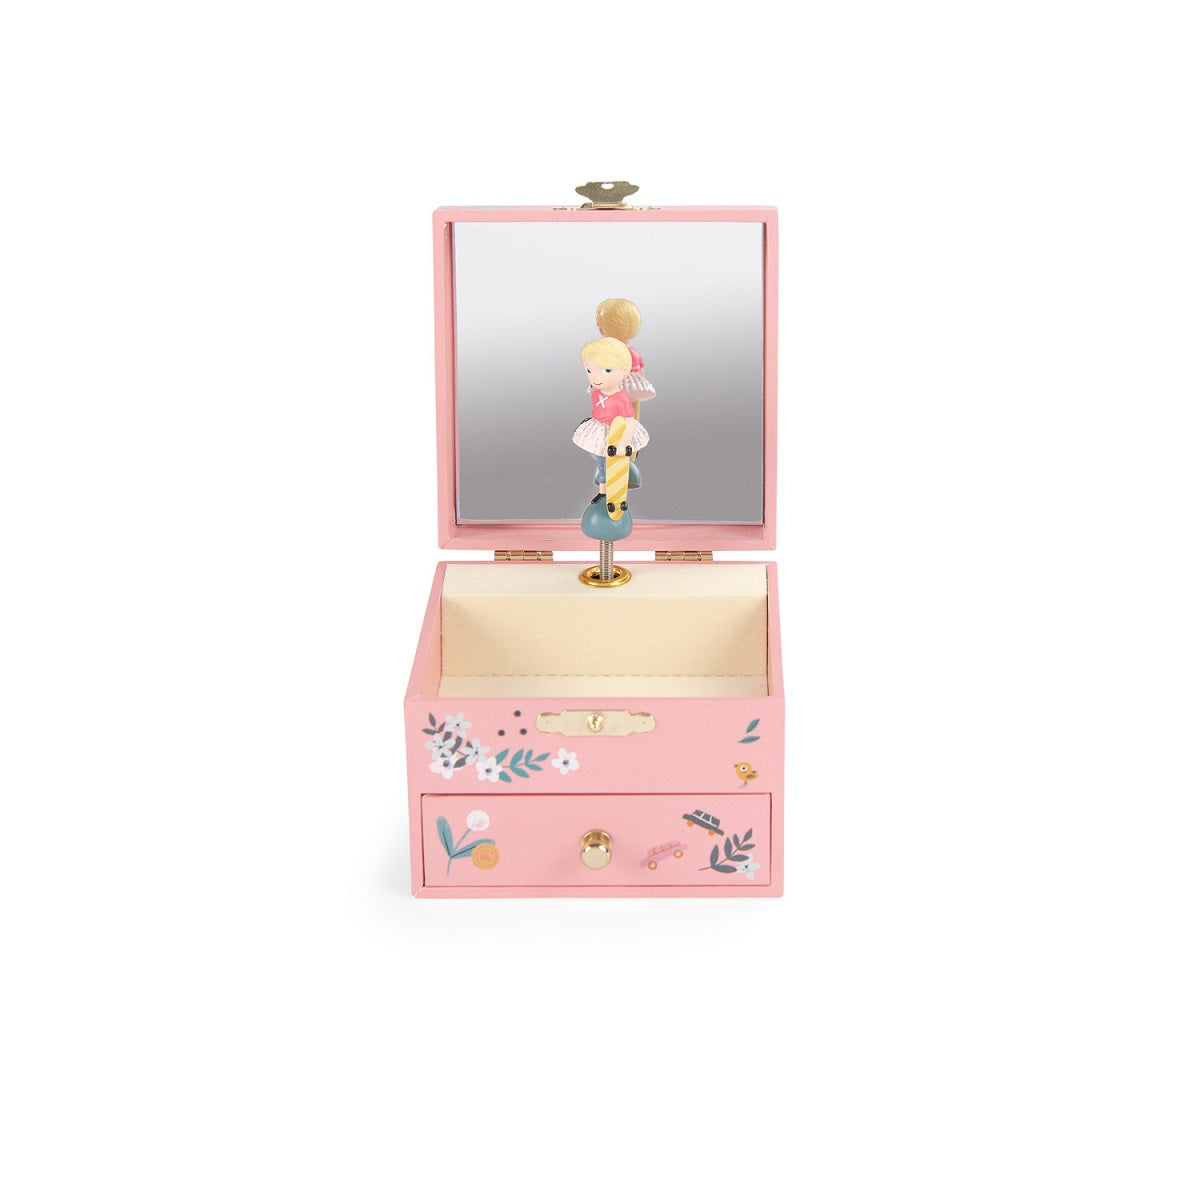 Parisiennes - musical jewellery box  By Moulin Roty